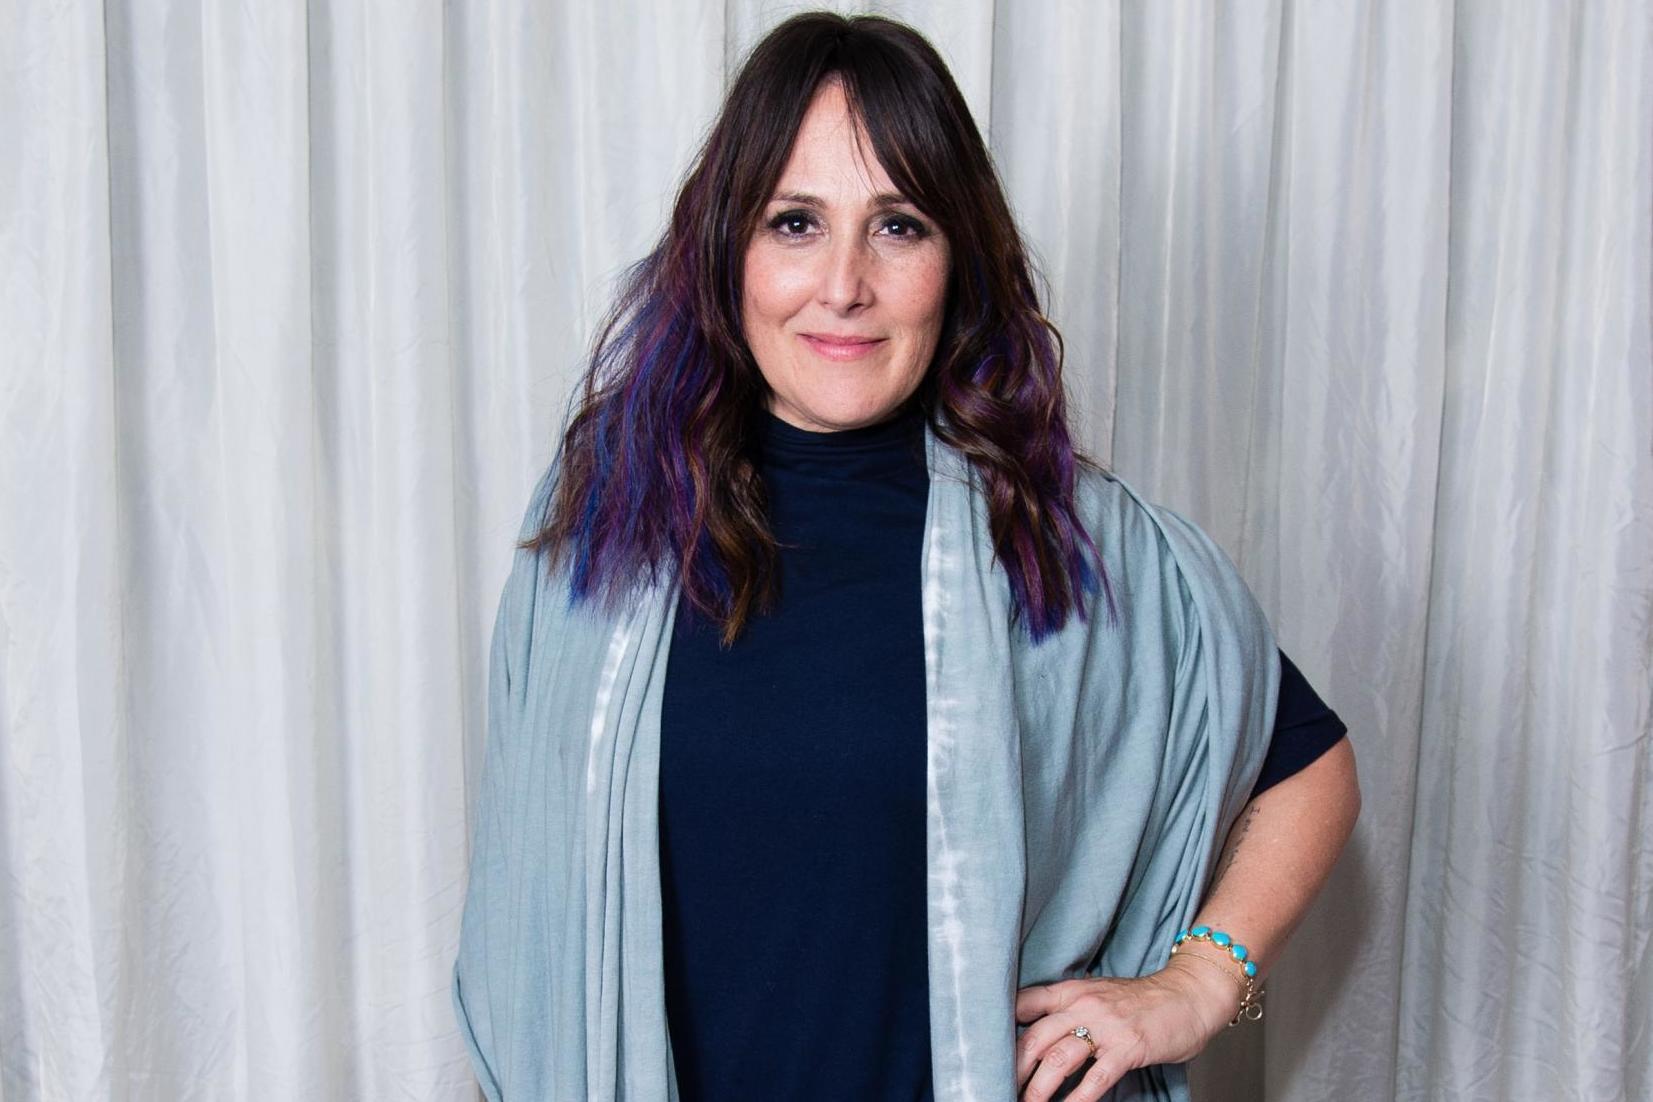 Ricki Lake reveals shaved head as she details 30-year struggle with hair loss